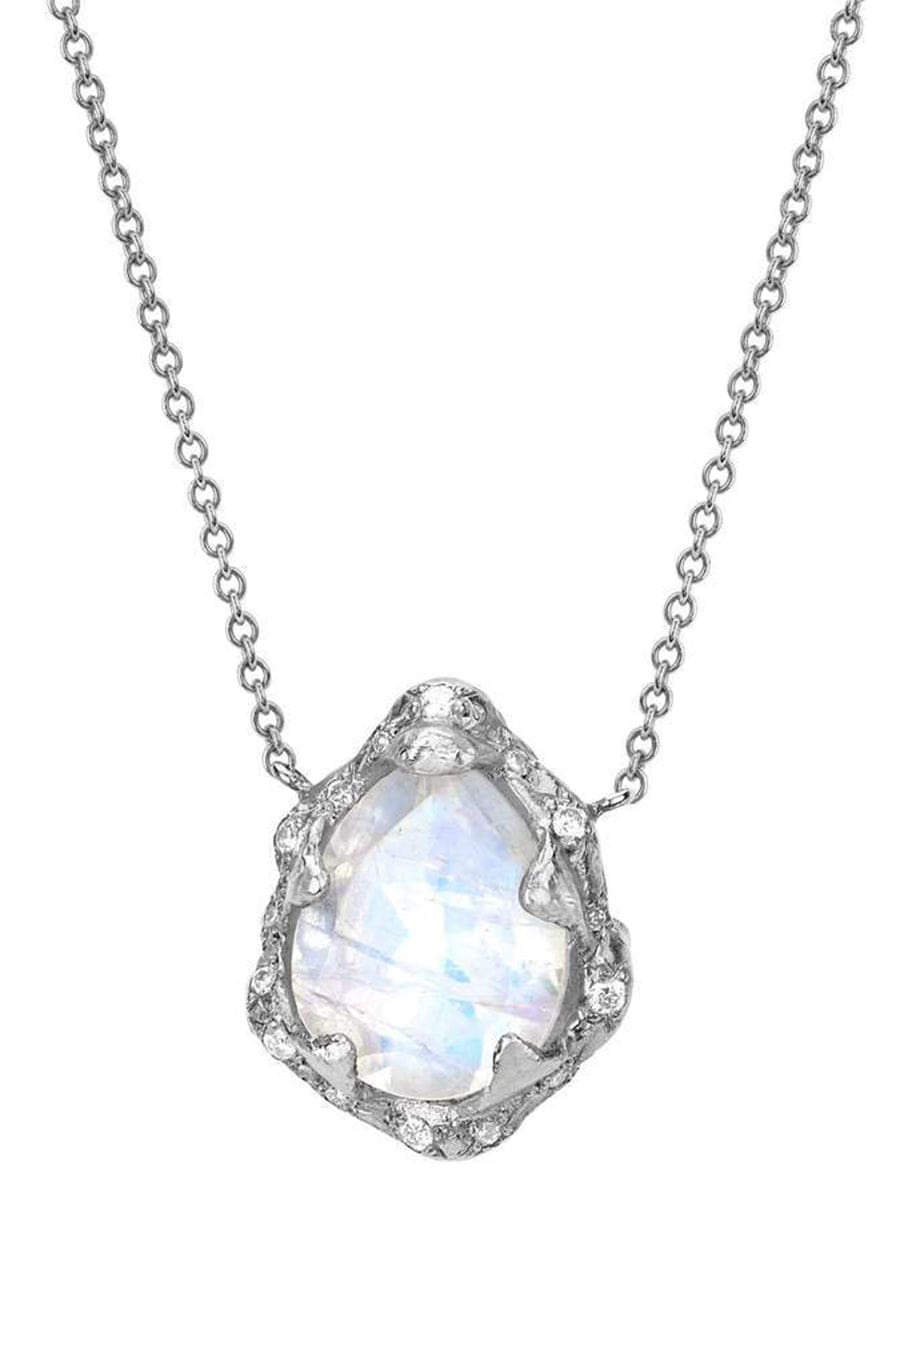 Baby Queen Water Drop Moonstone Necklace with Sprinkled Diamonds JEWELRYFINE JEWELNECKLACE O LOGAN HOLLOWELL   